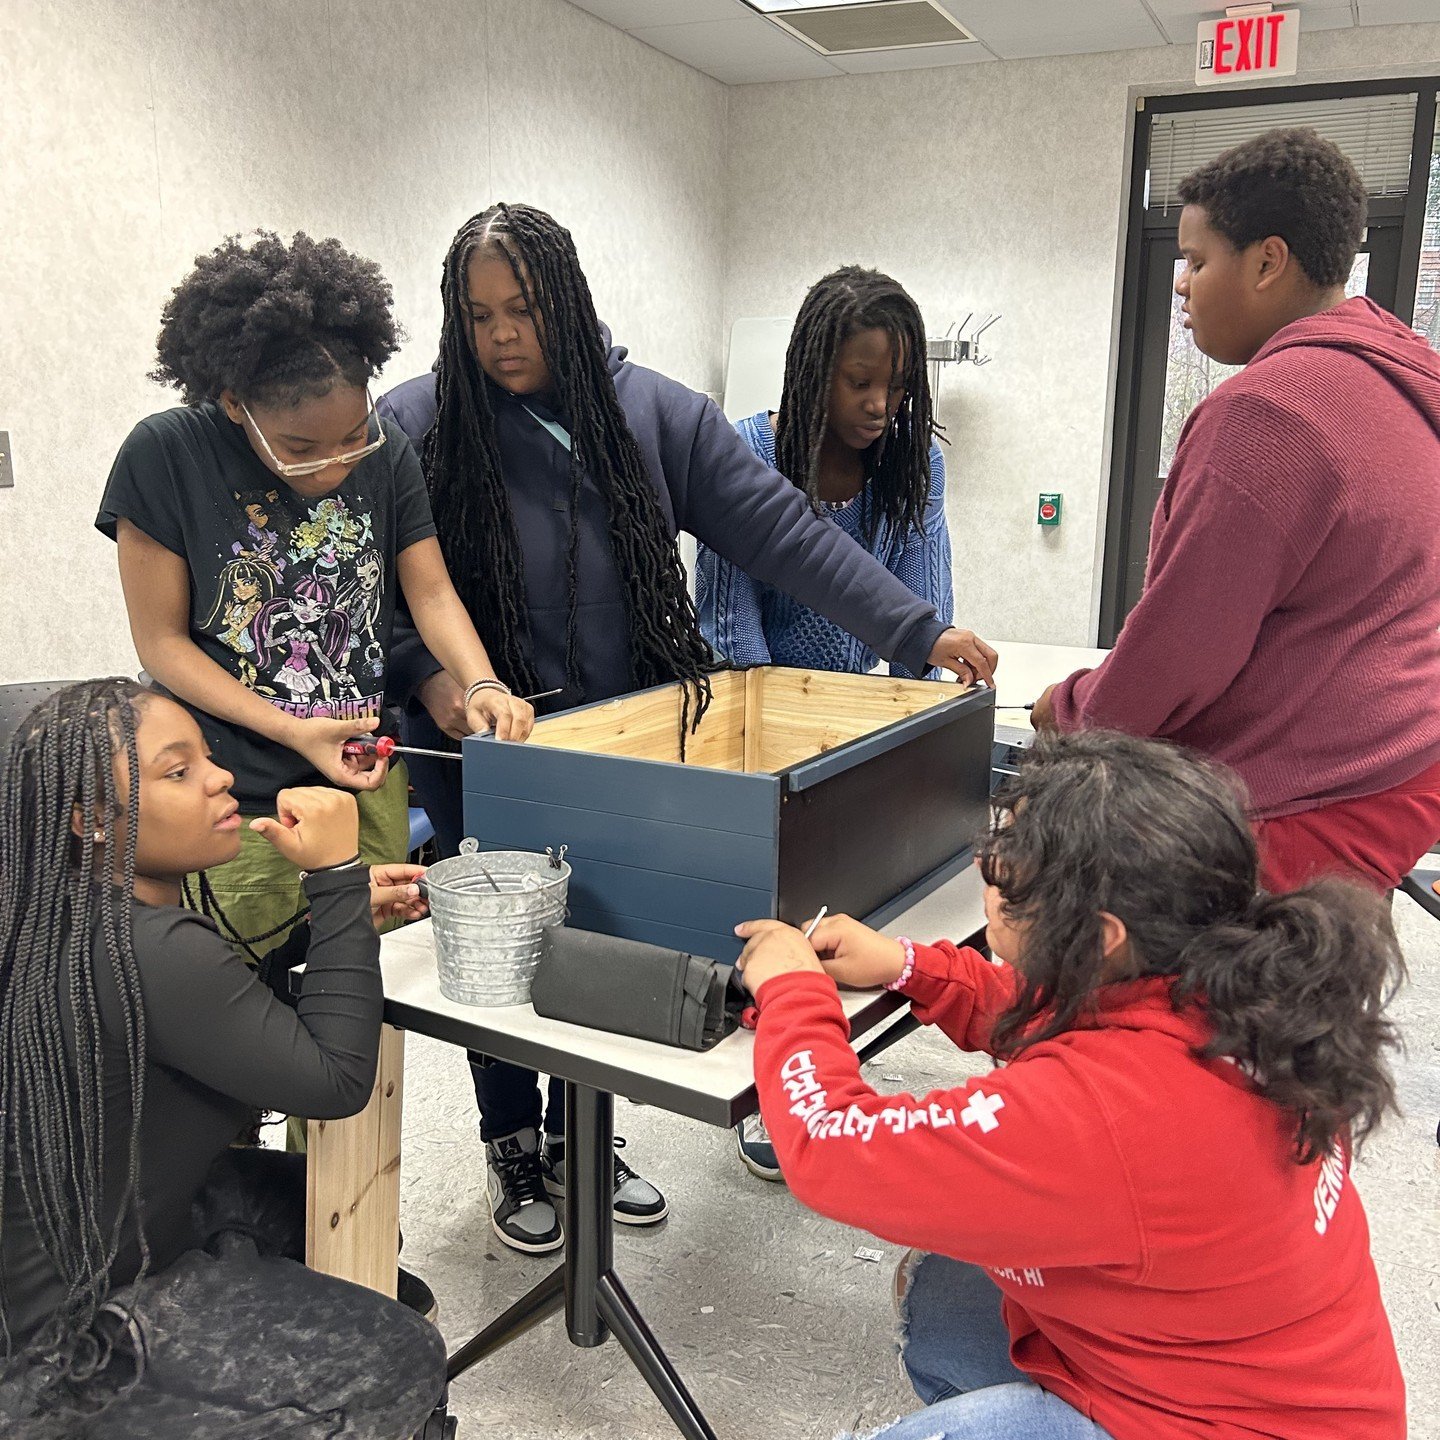 Our Petersburg Club members are digging deep into hands-on learning through a 4-H program at VSU! Here, Club members are pictured assembling garden beds that will be used at VSU's Randolph Farm. #youthdevelopment #youthempowerment #youthleadership #y